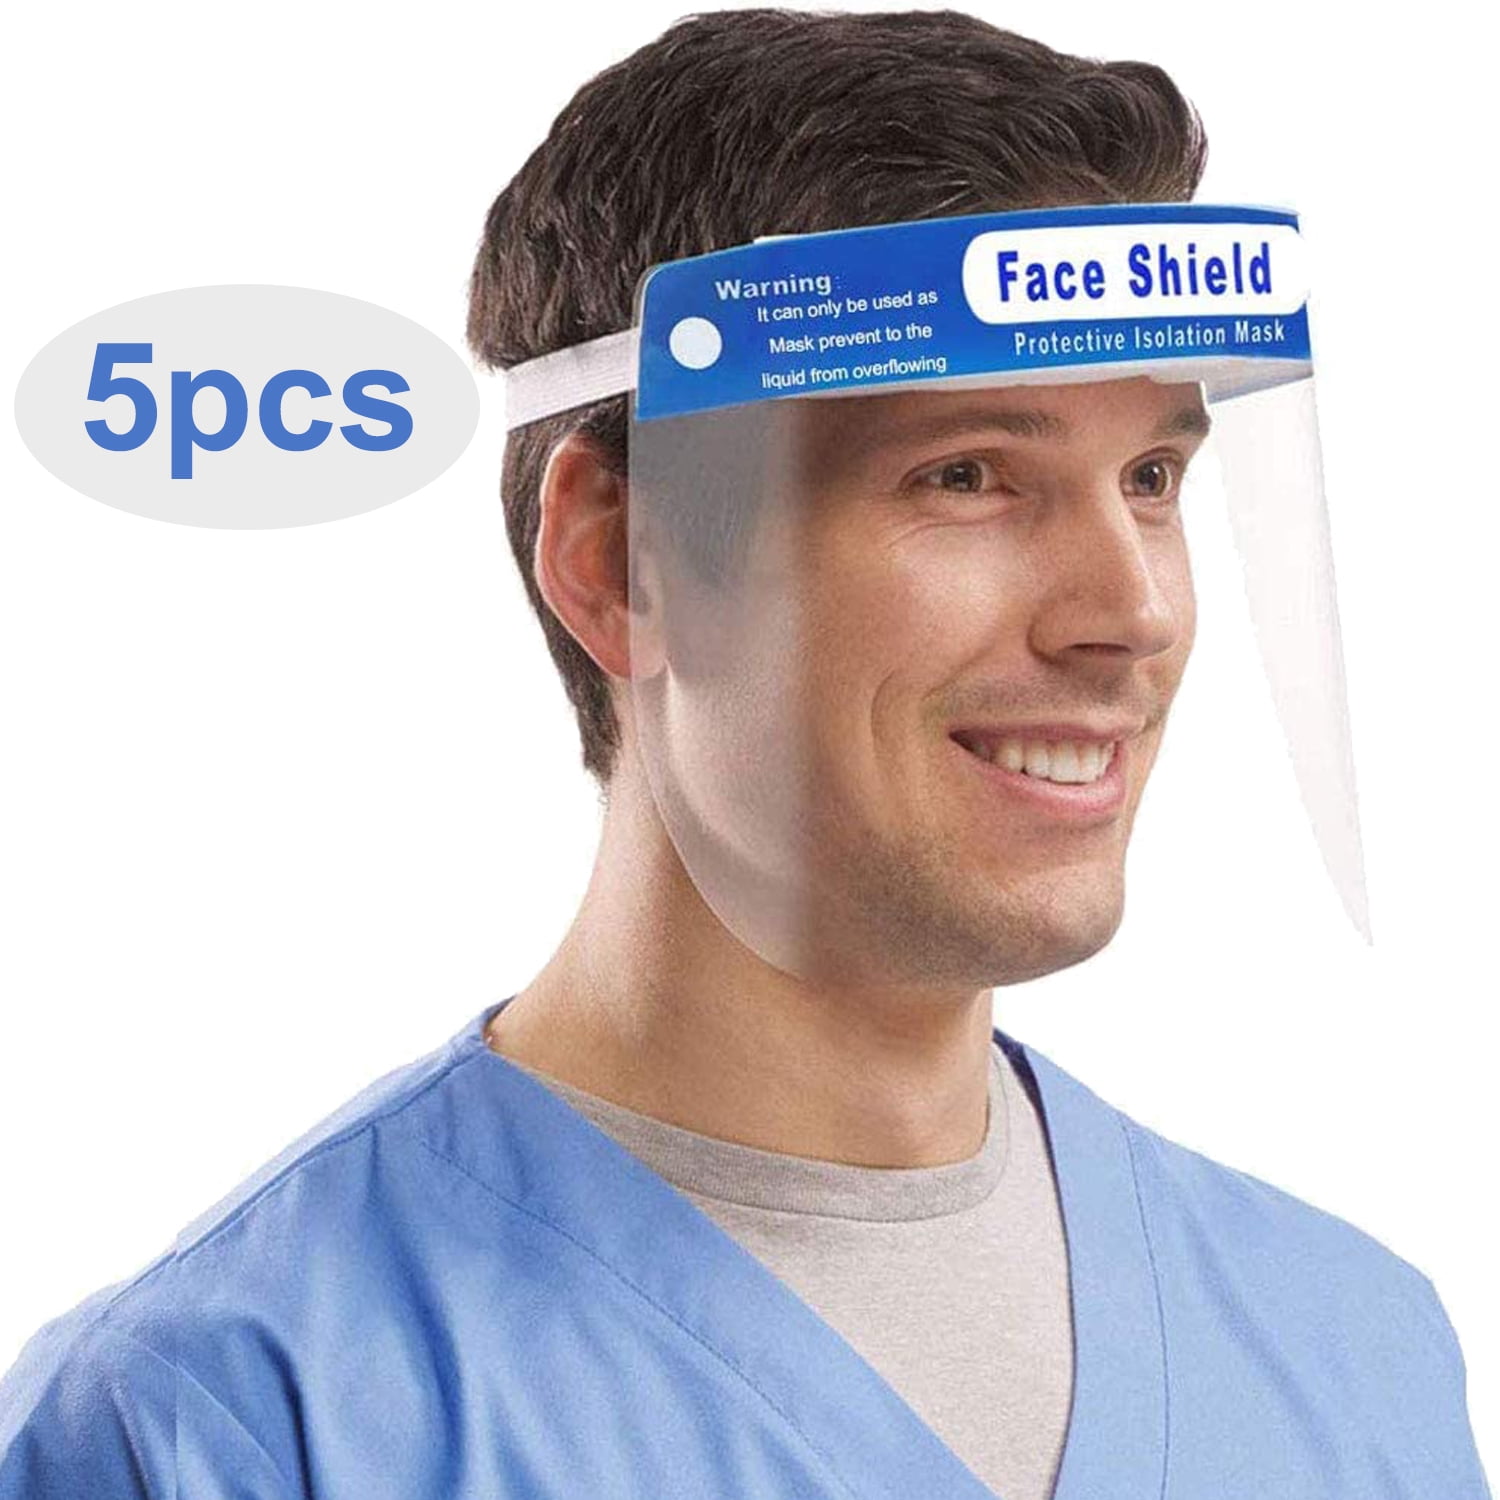 Details about   Safety Face Shield Full Face Clear Anti Fog Transparent Work Industry E 242 